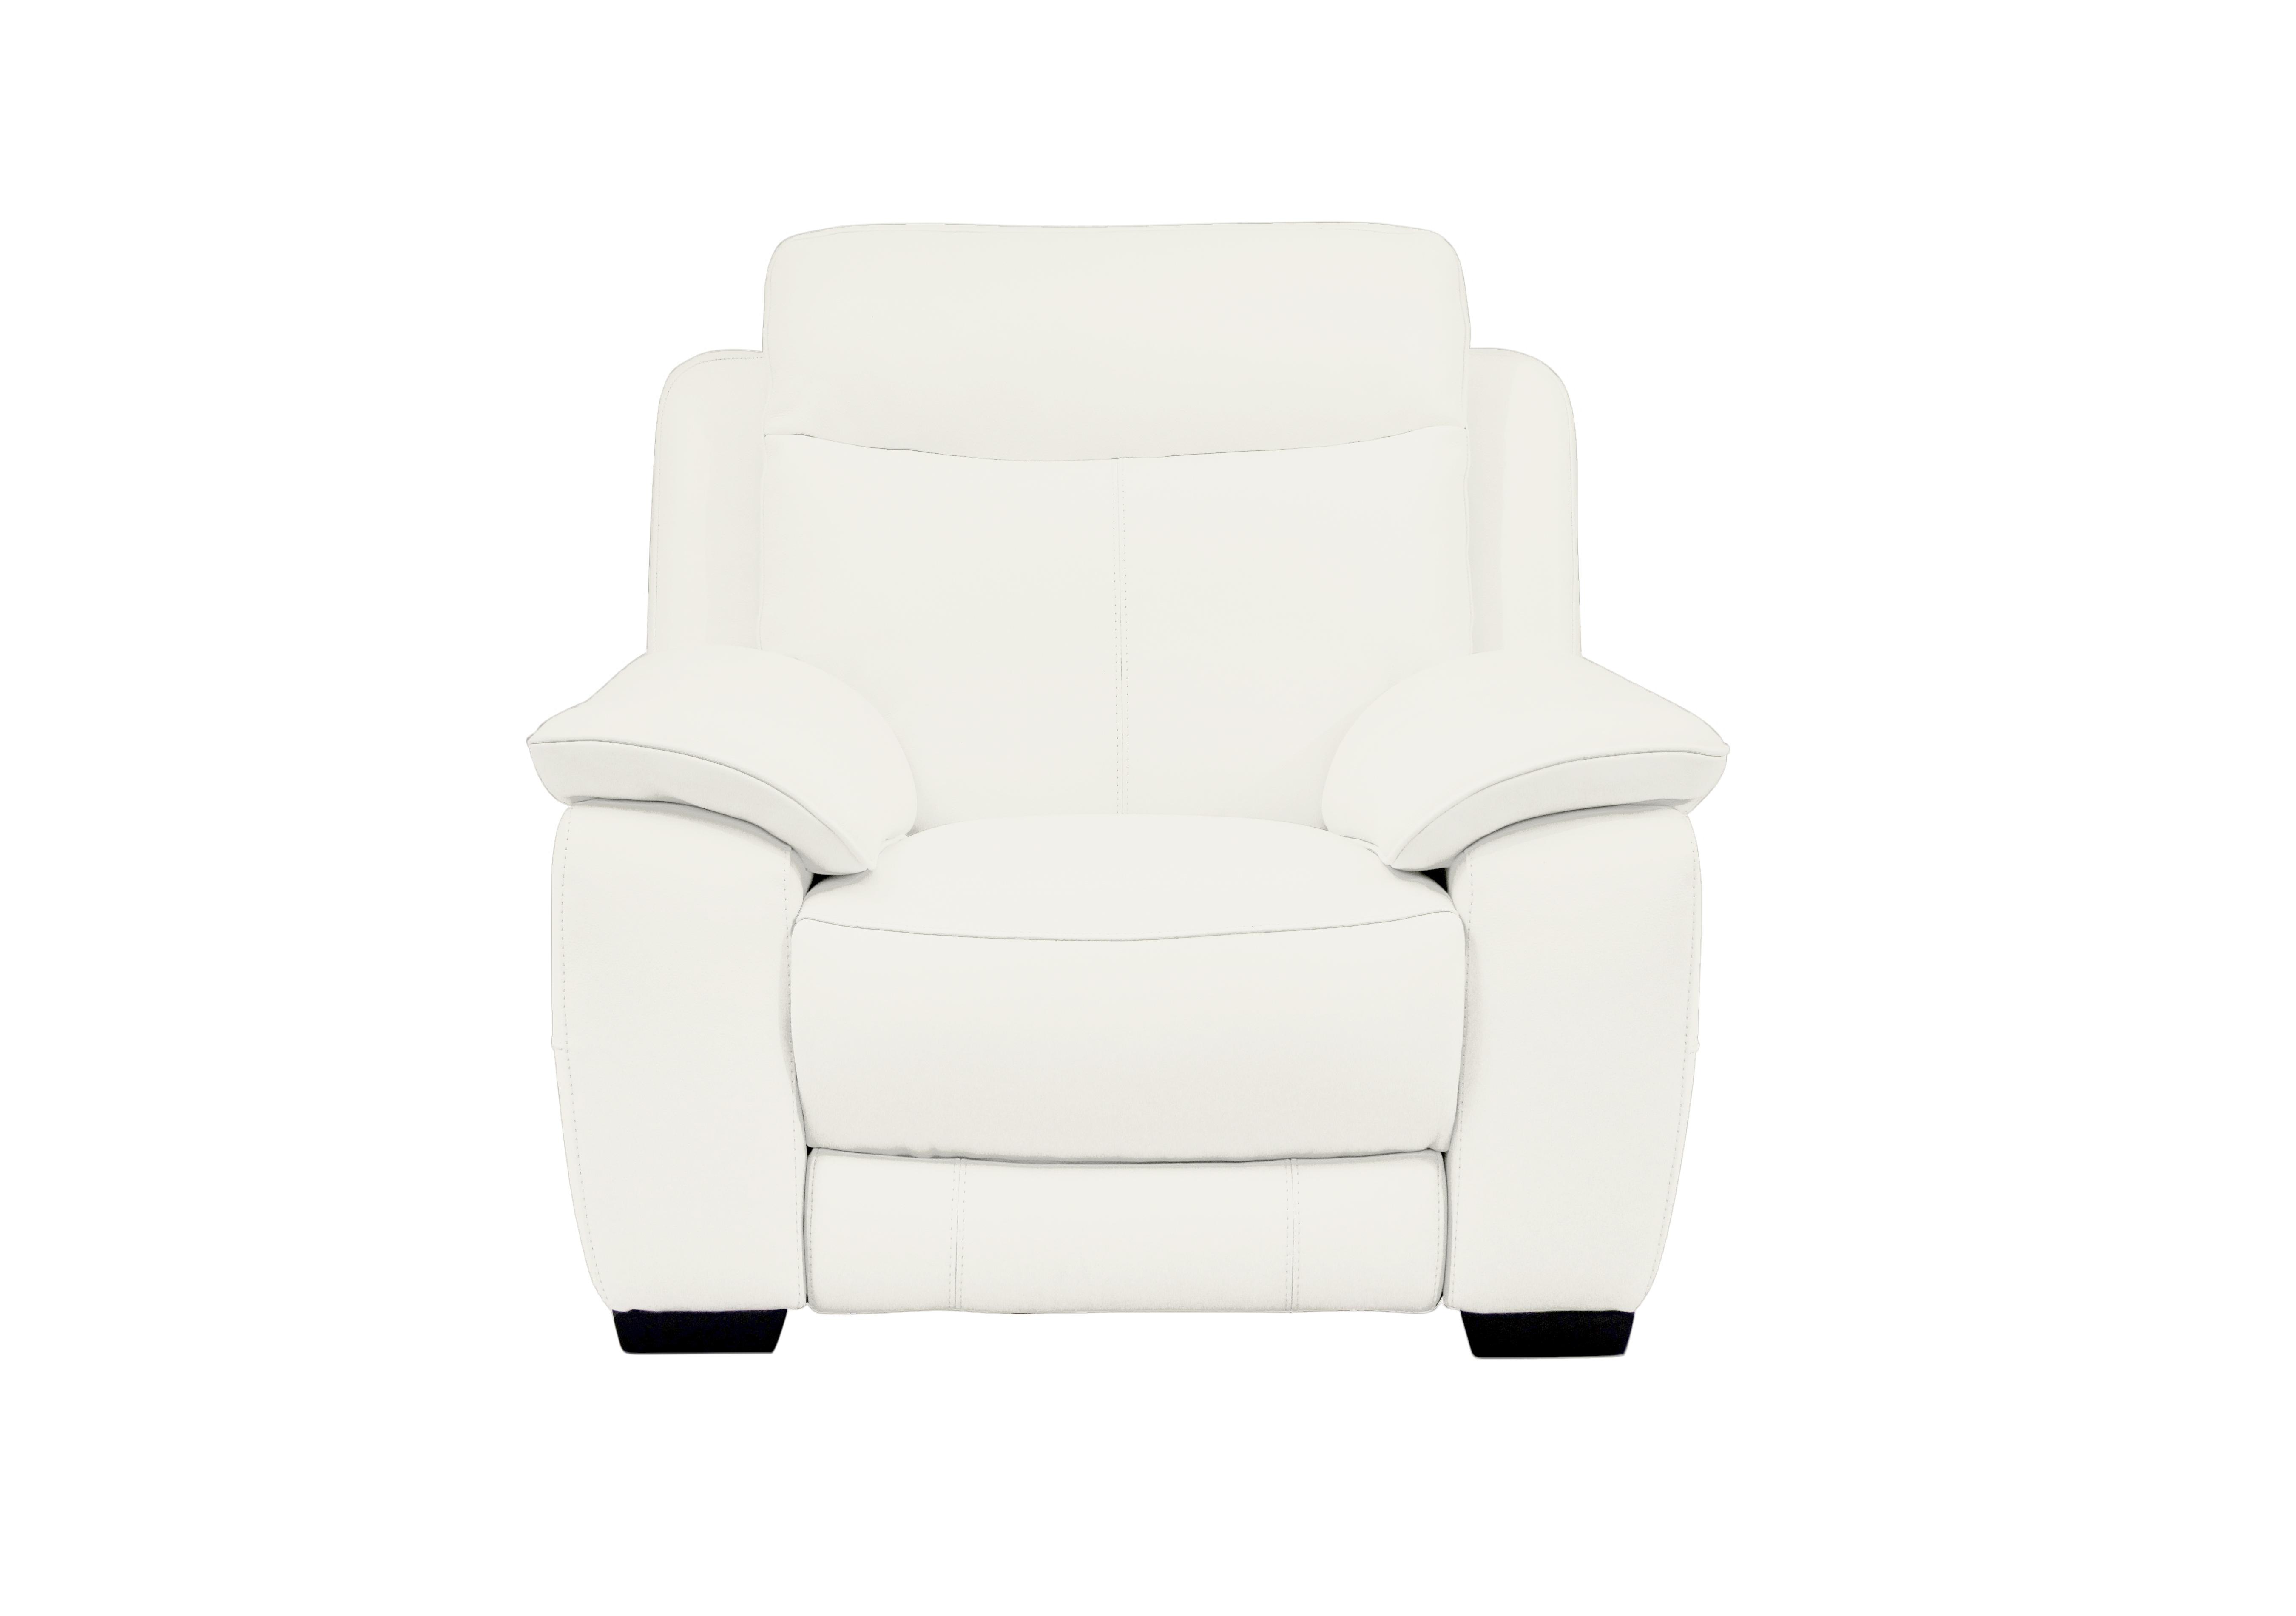 Starlight Express Leather Power Armchair with Power Headrest in Bv-744d Star White on Furniture Village